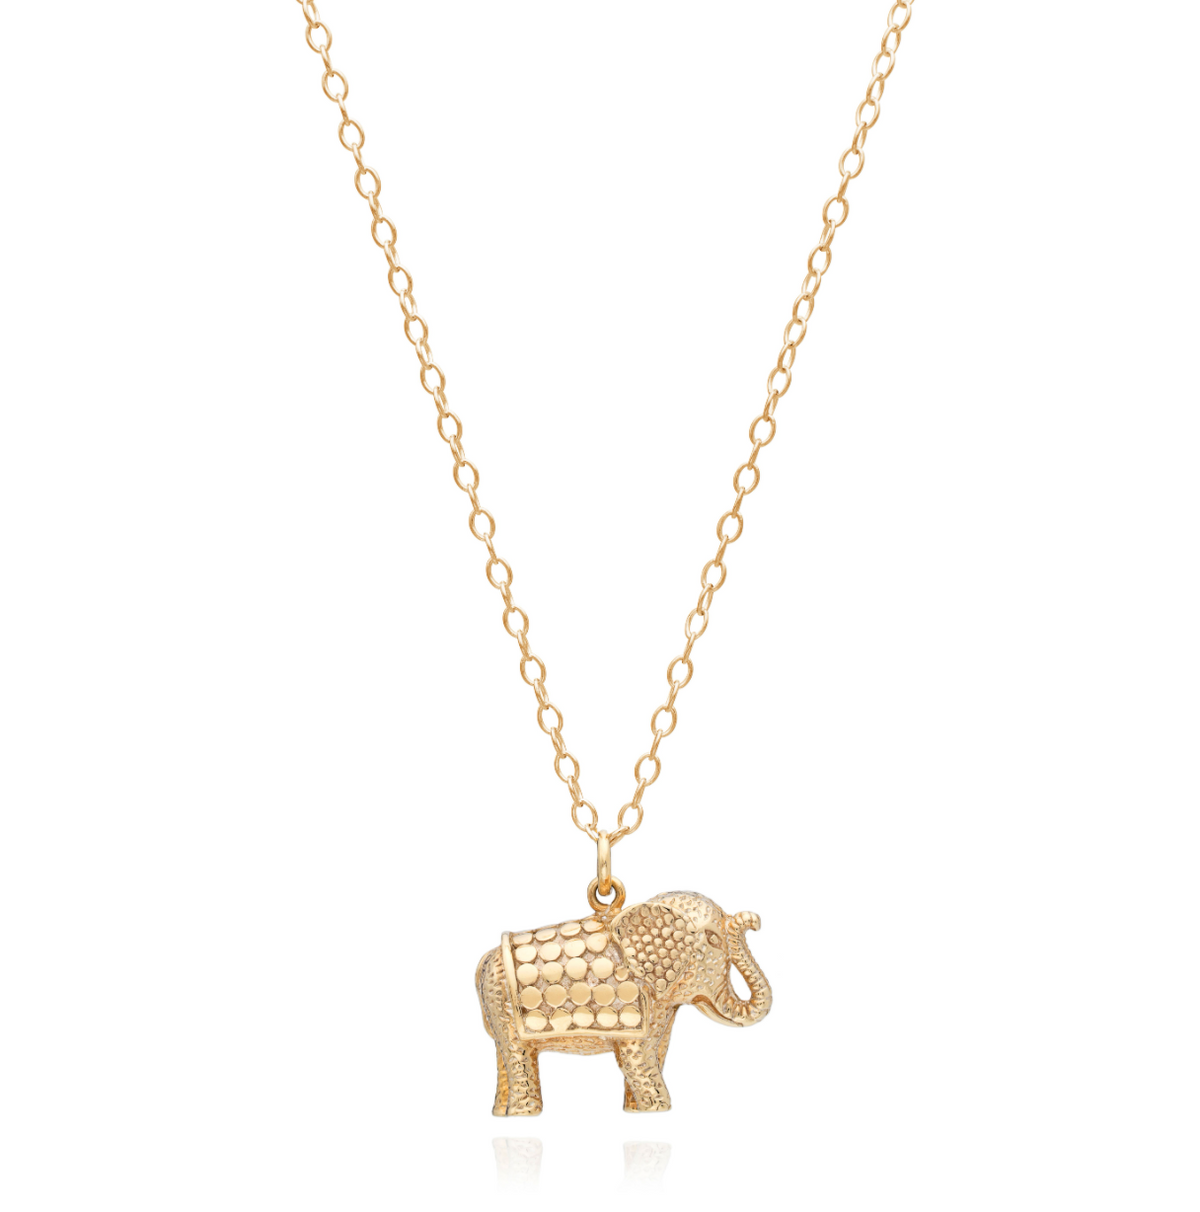 Elephant pendant necklace in gold